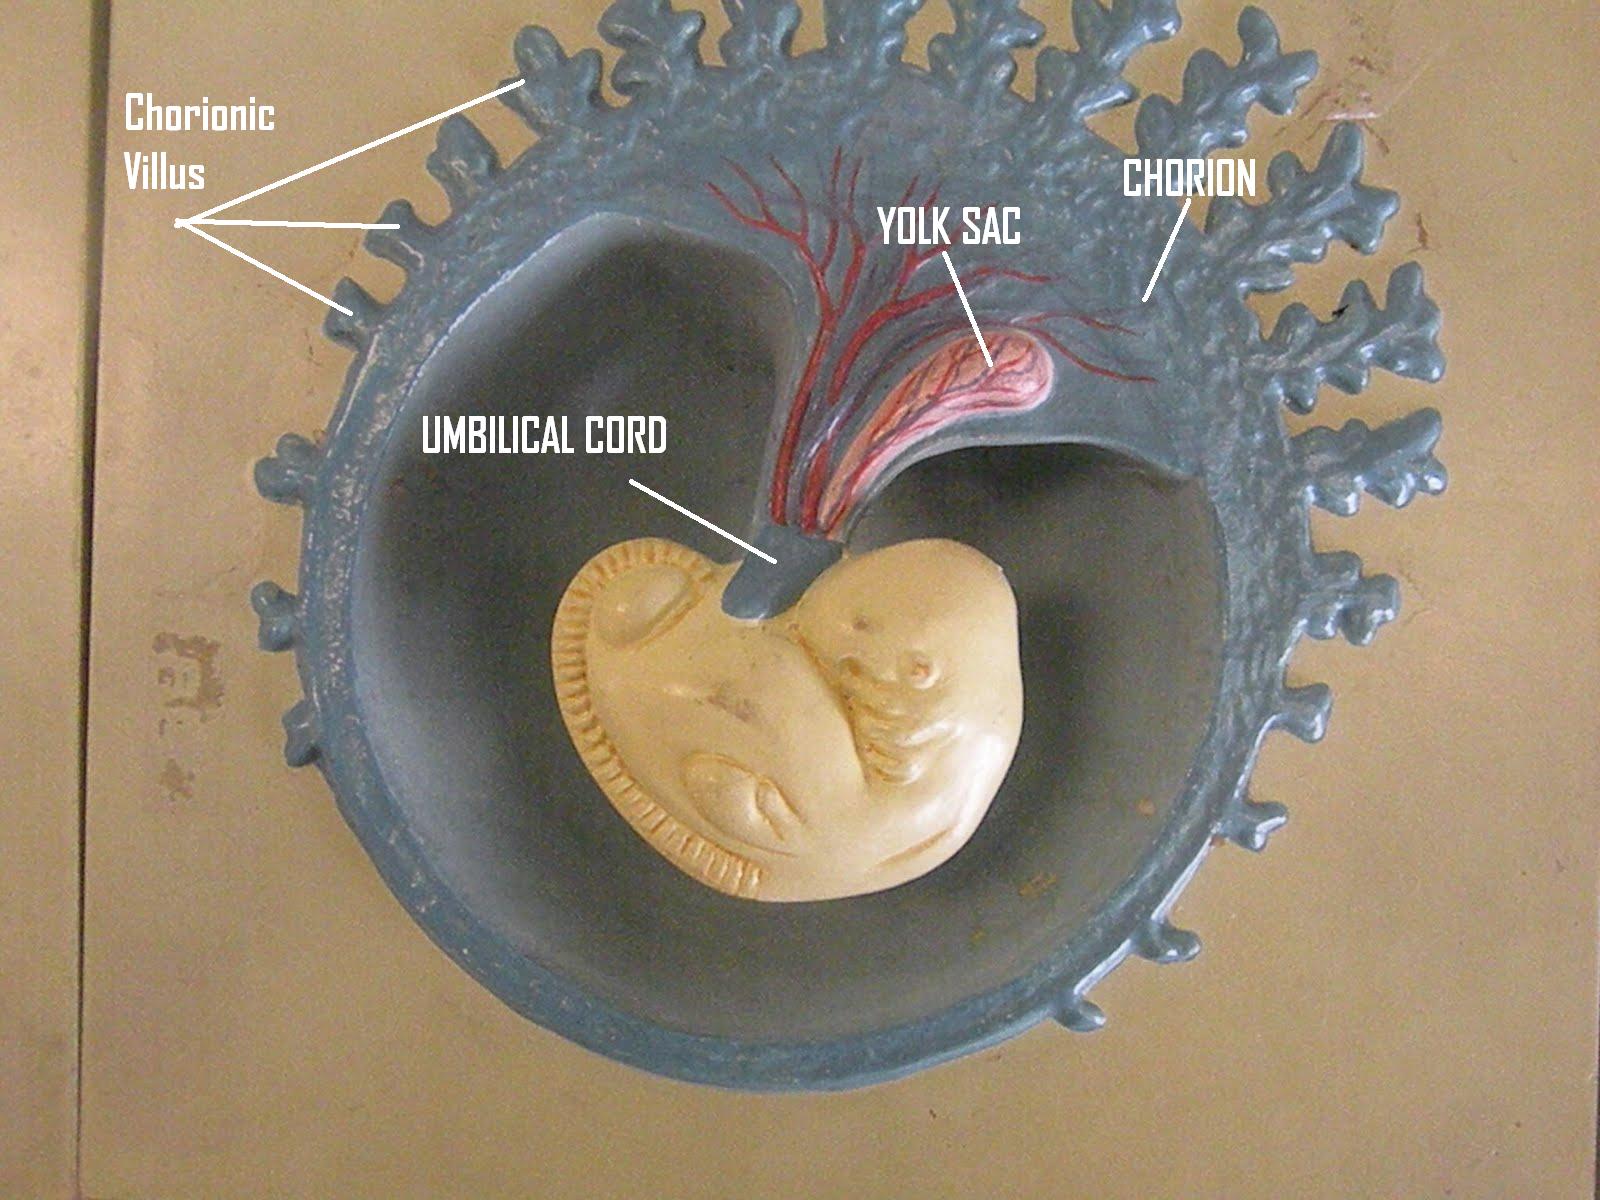 Psc Anatomy And Physiology Labeled Embryonic Development Models